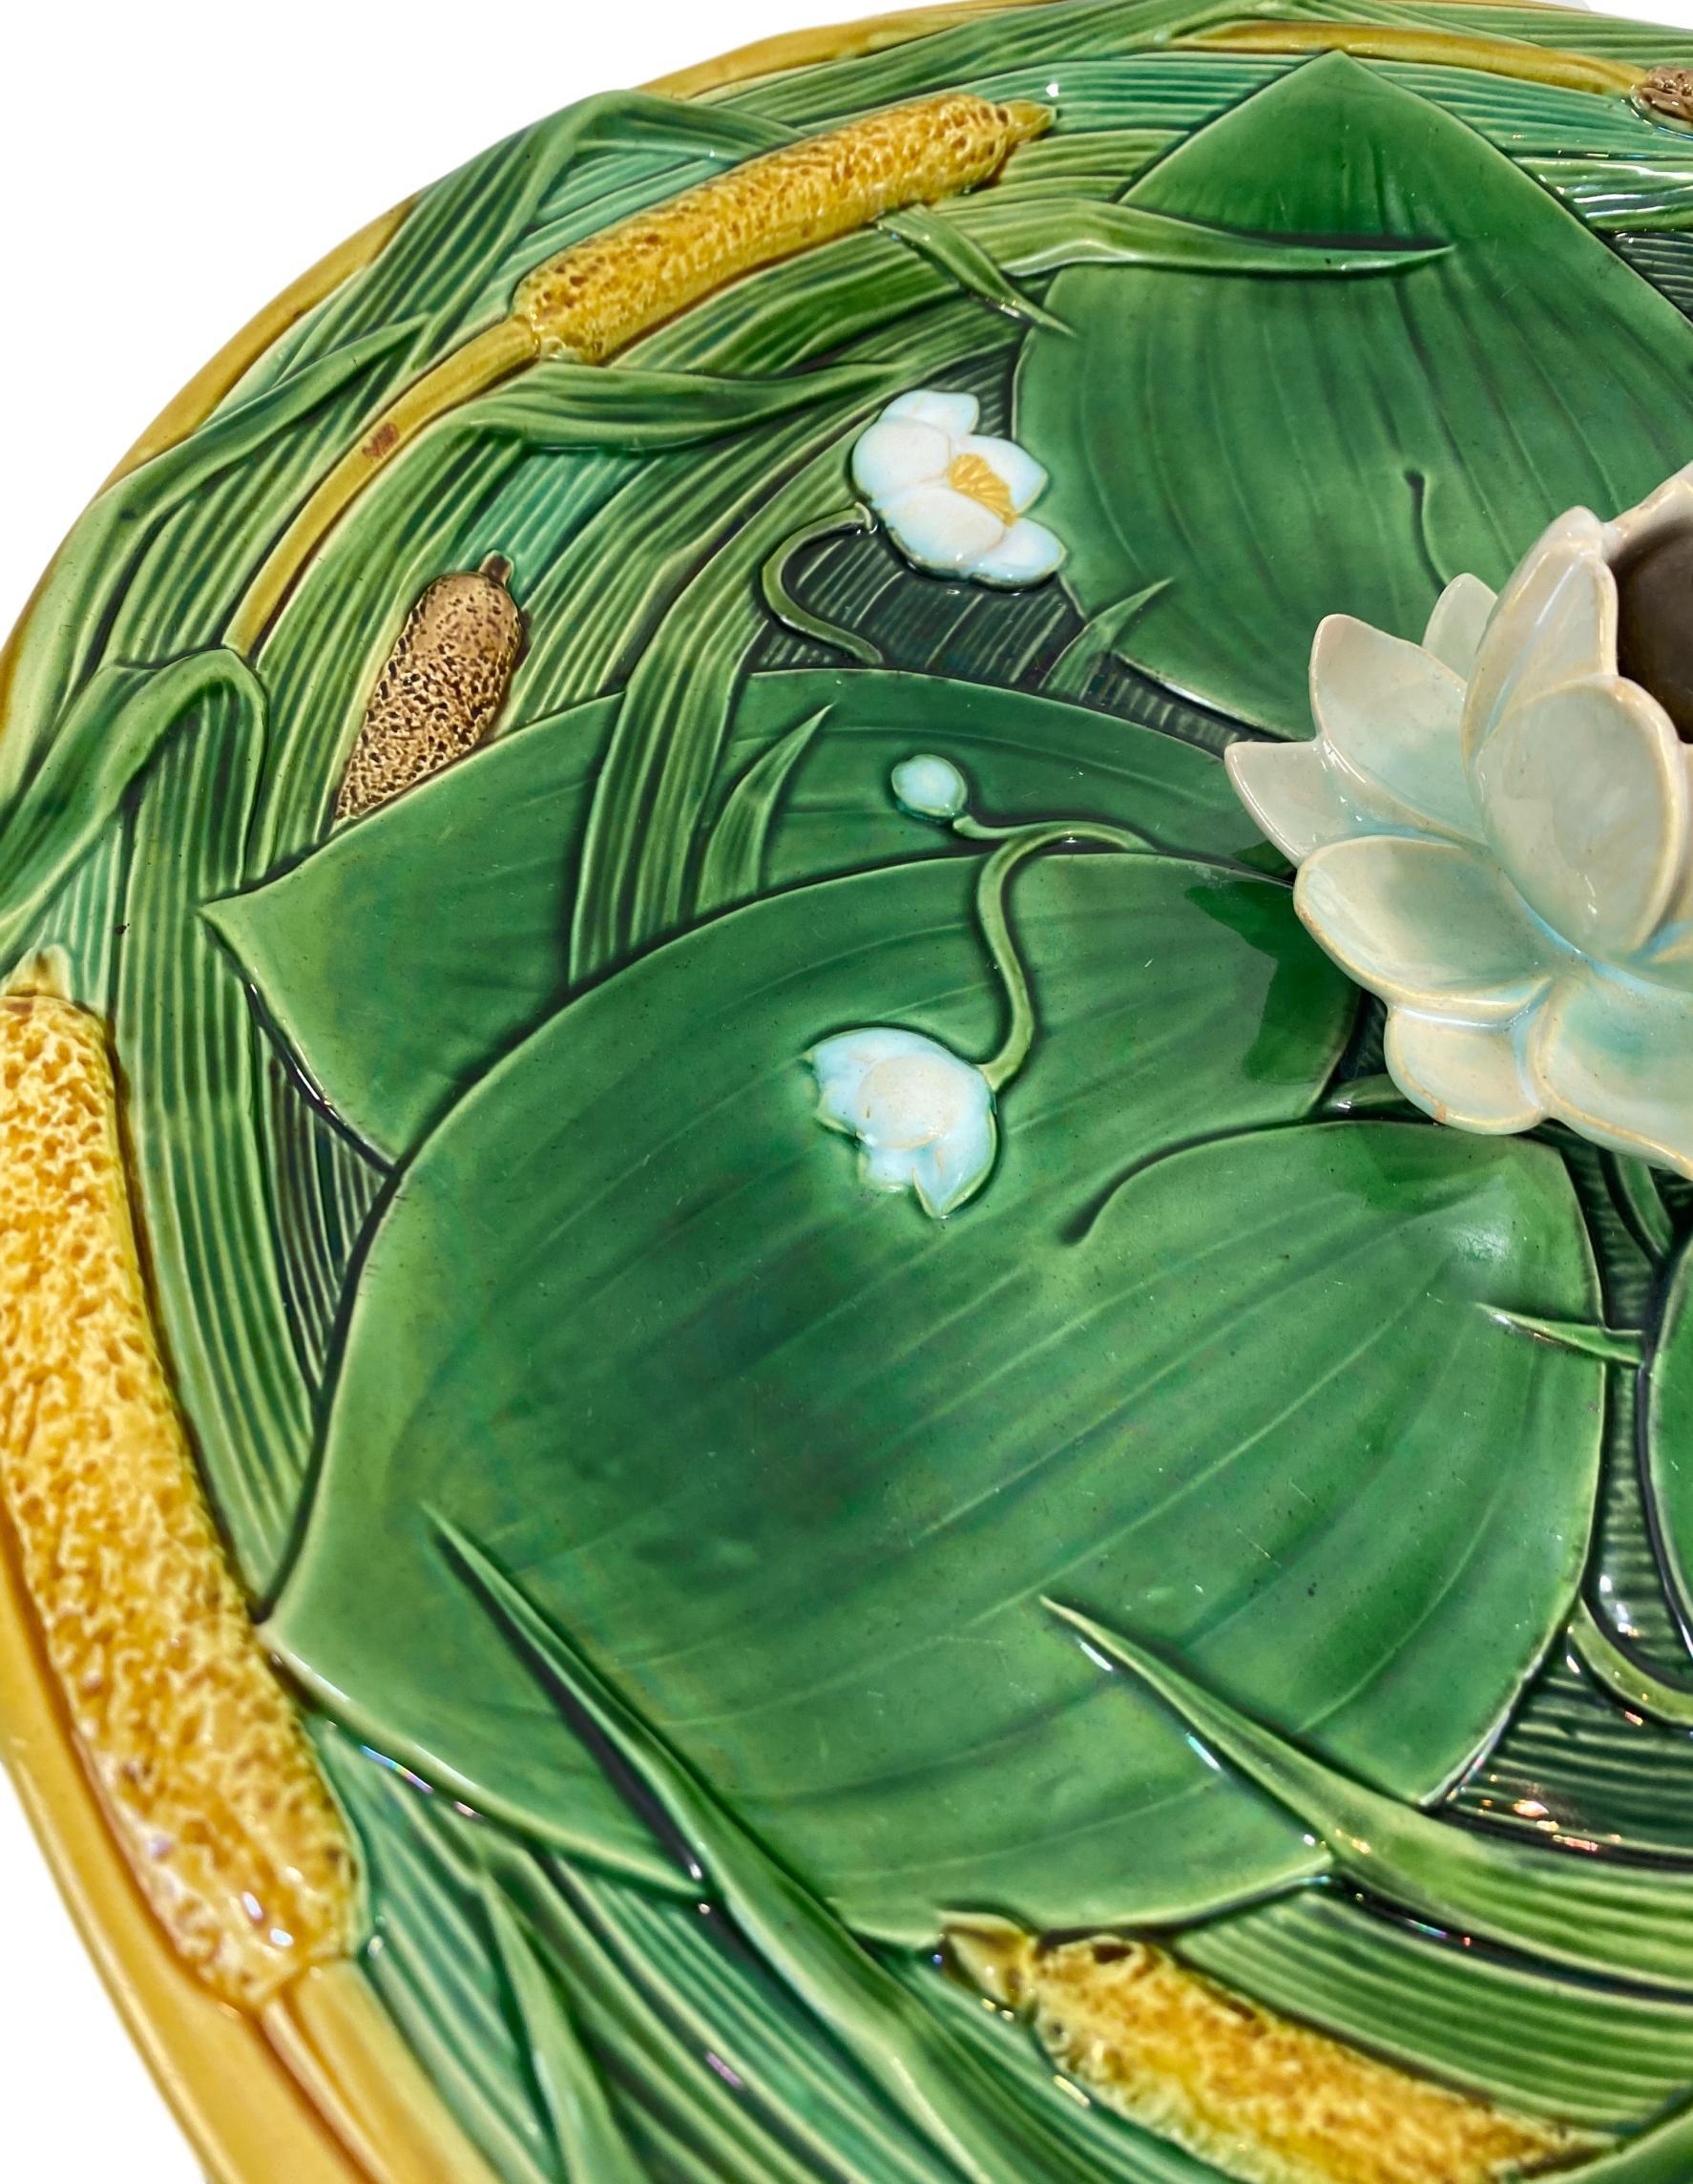 Minton Majolica Centerpiece Tray 15-in, Lotus Flower on Green Ground, Dated 1863 In Good Condition For Sale In Banner Elk, NC